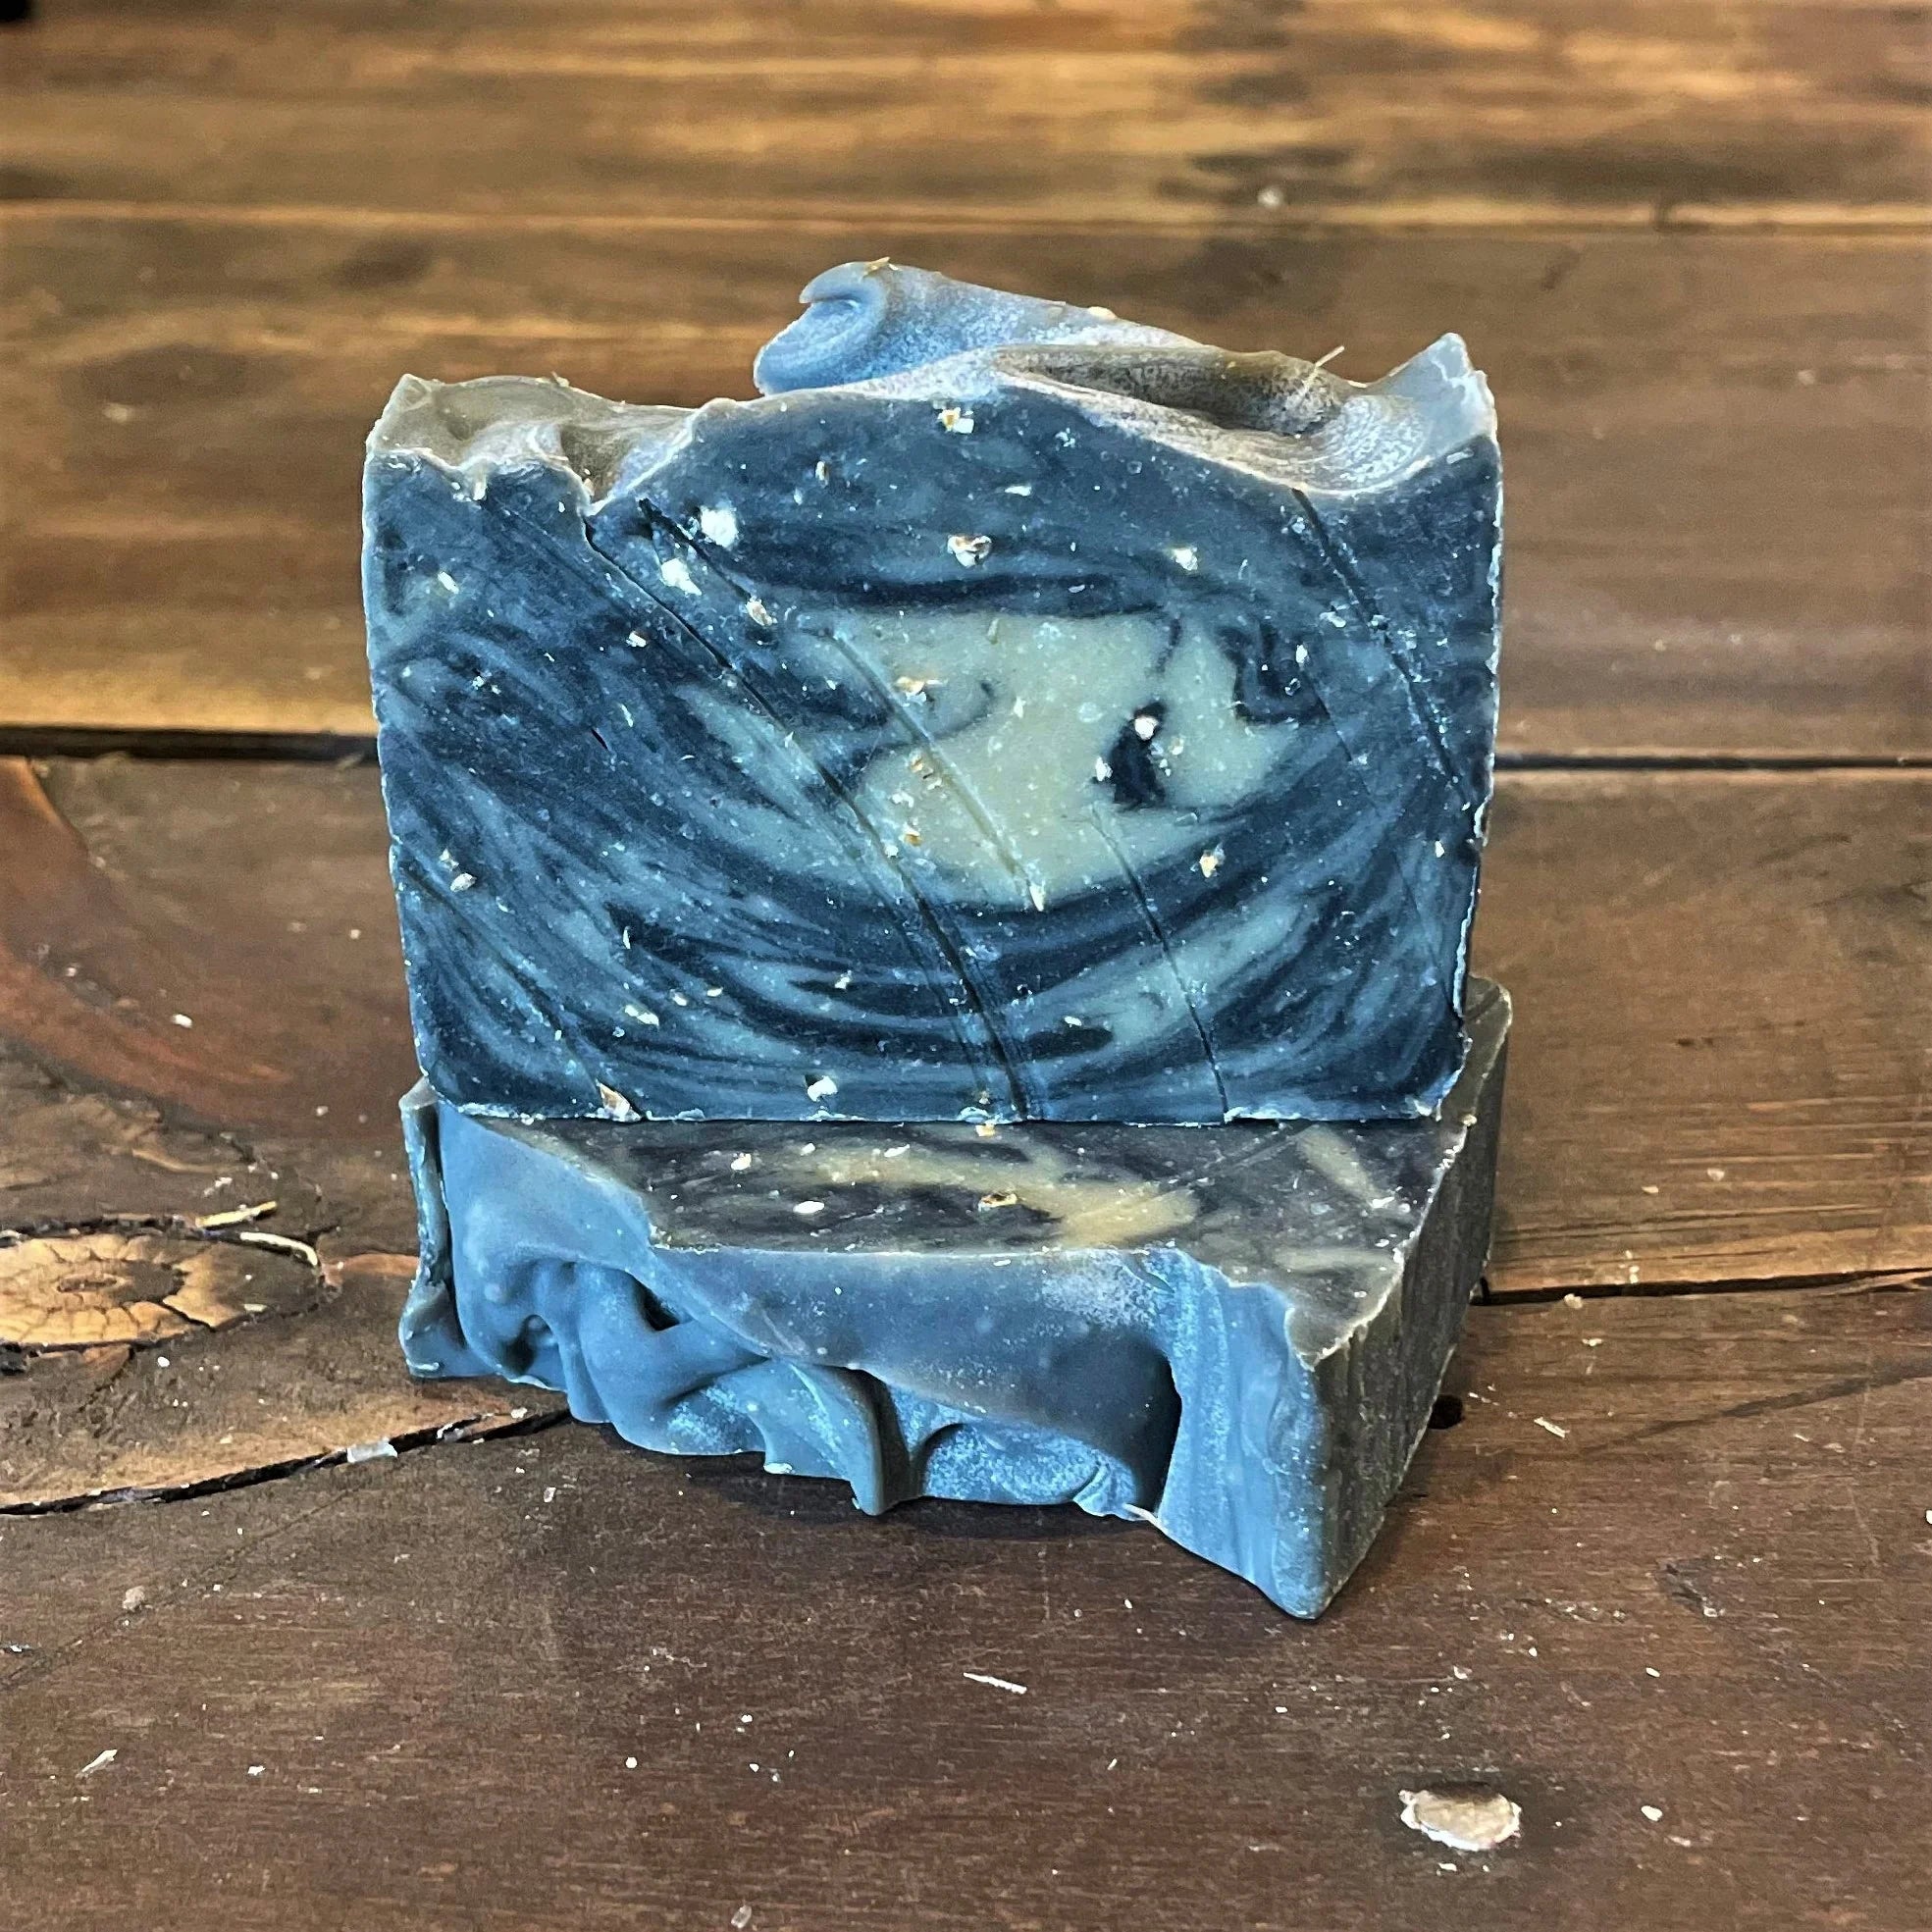 Unique Handmade Soap Gifting Ideas for Every Utah Valley Occasion